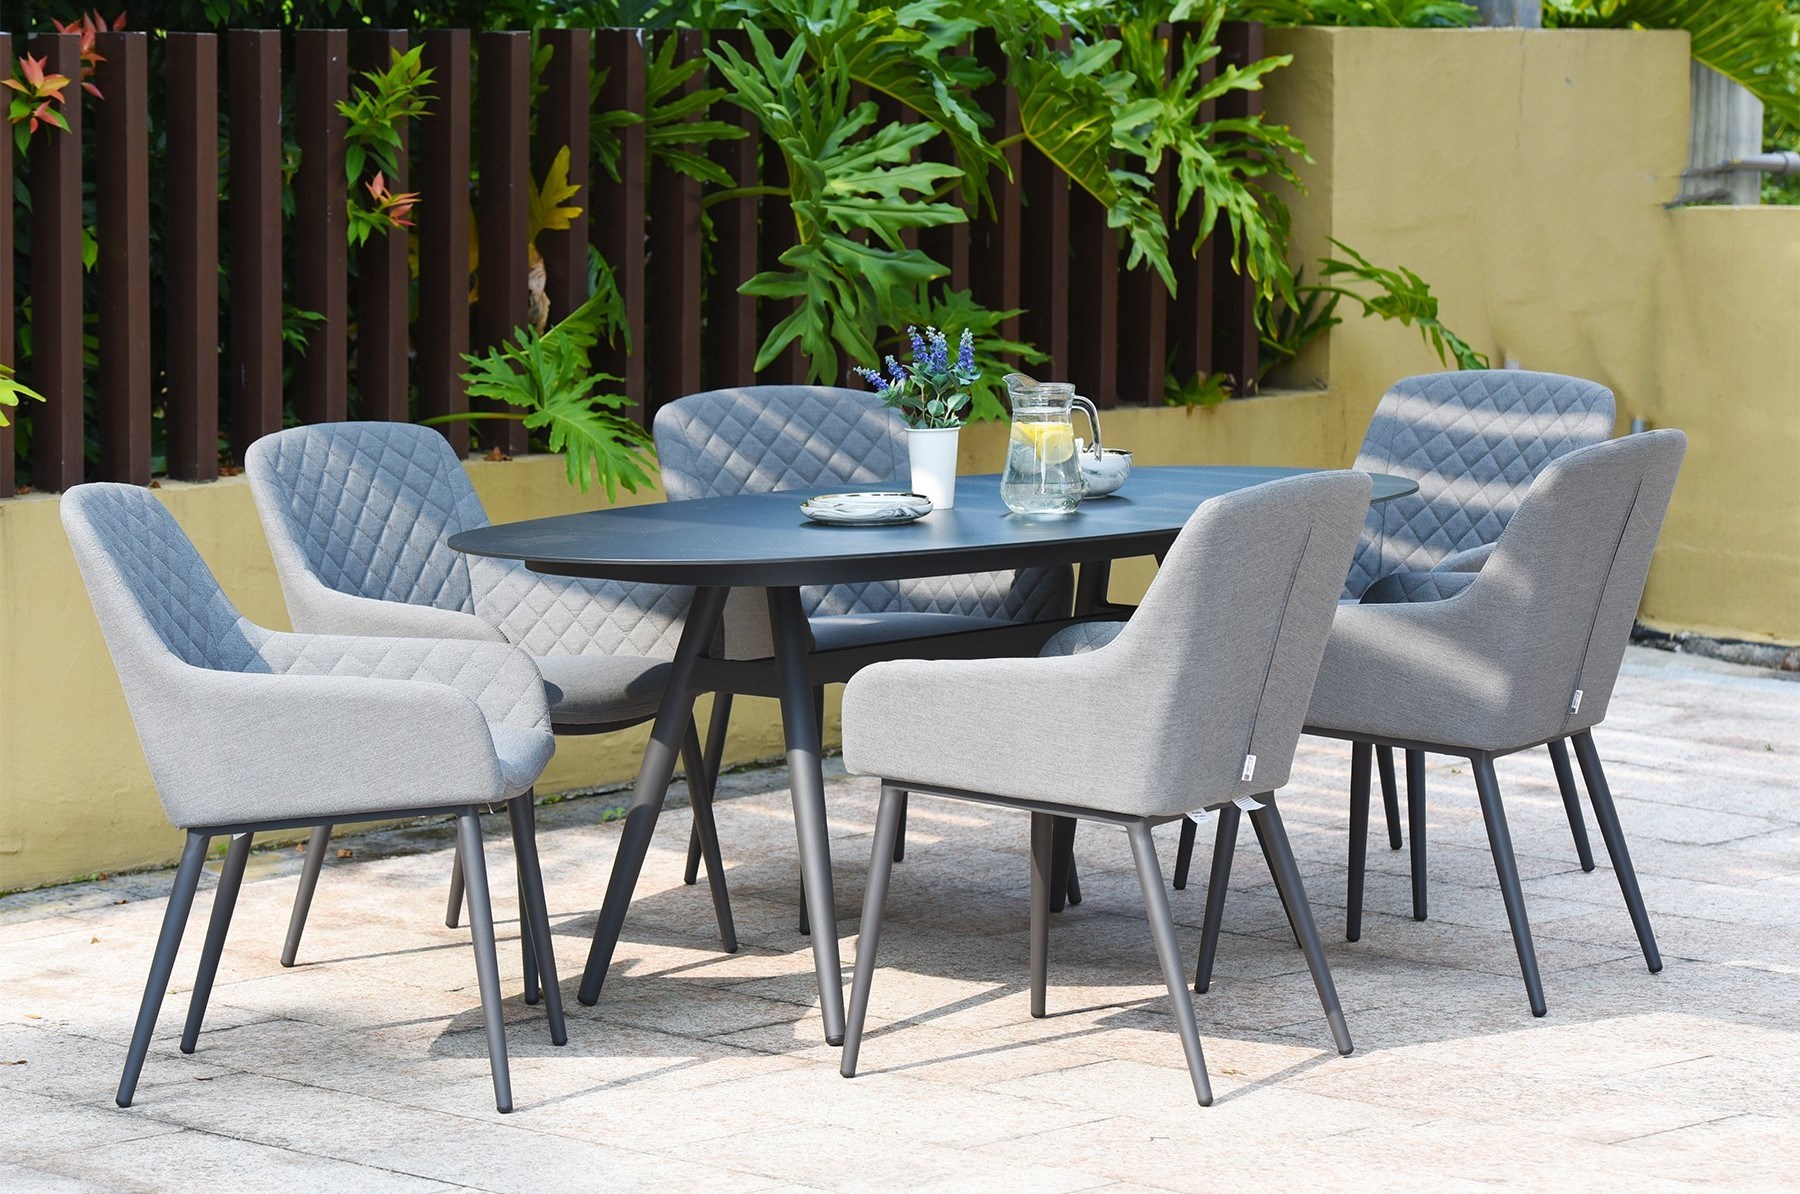 Outdoor Patio Dining Sets for Small Spaces: How to Choose post thumbnail image